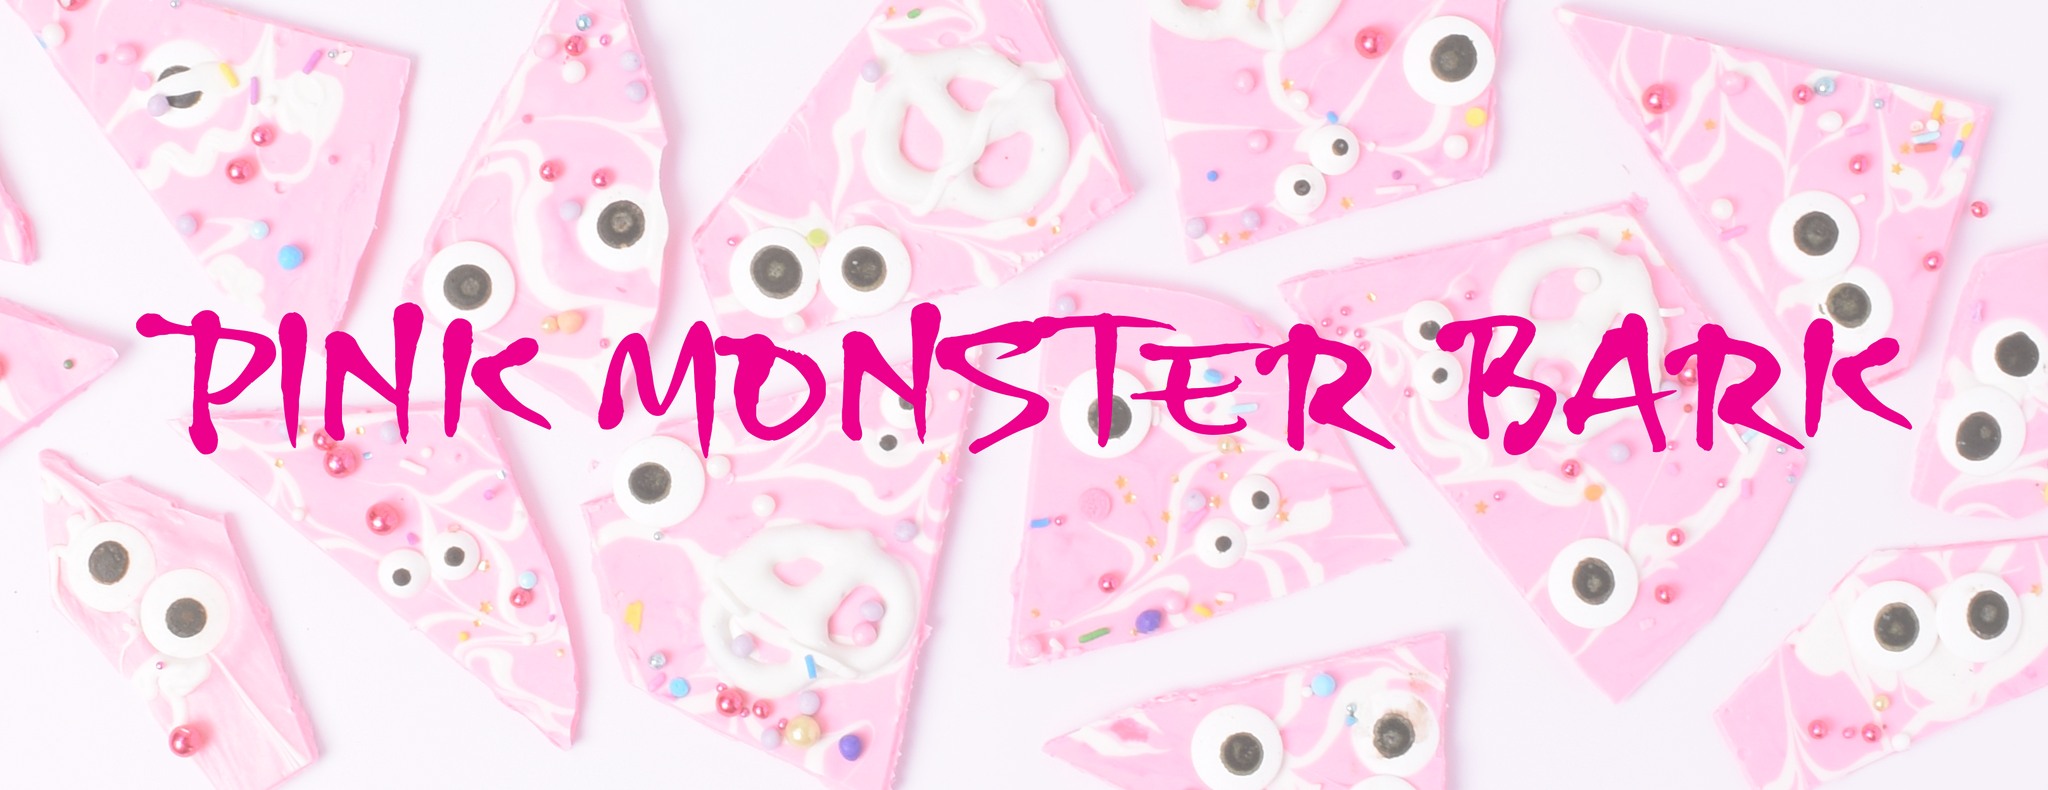 PARTY ET CIE BAKES - PINK MONSTER BARK